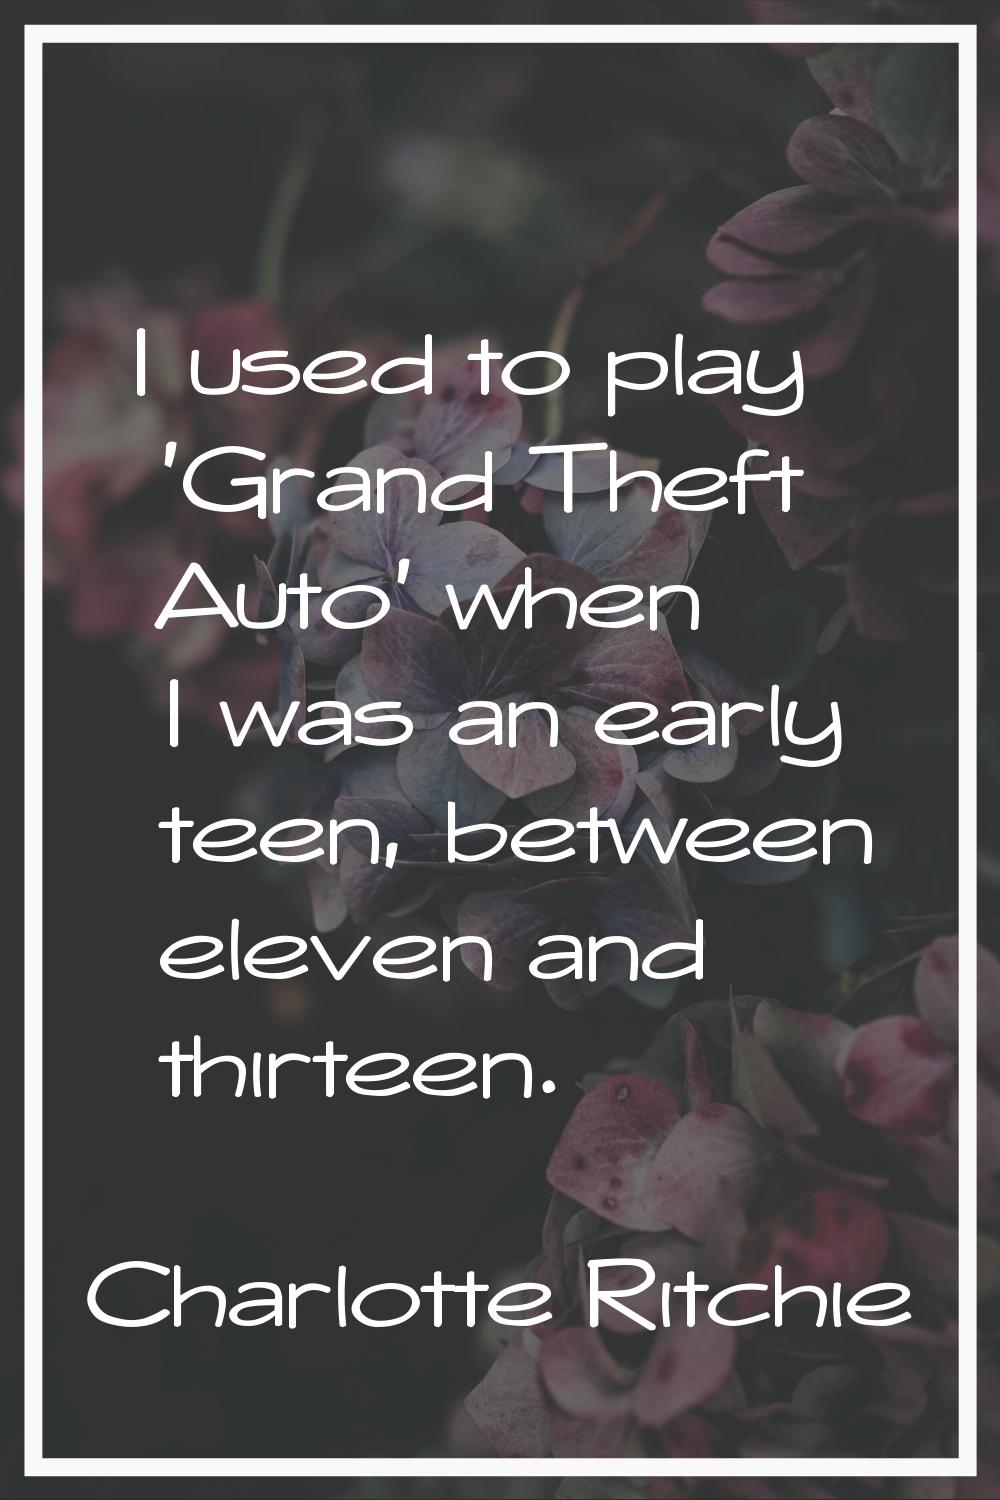 I used to play 'Grand Theft Auto' when I was an early teen, between eleven and thirteen.